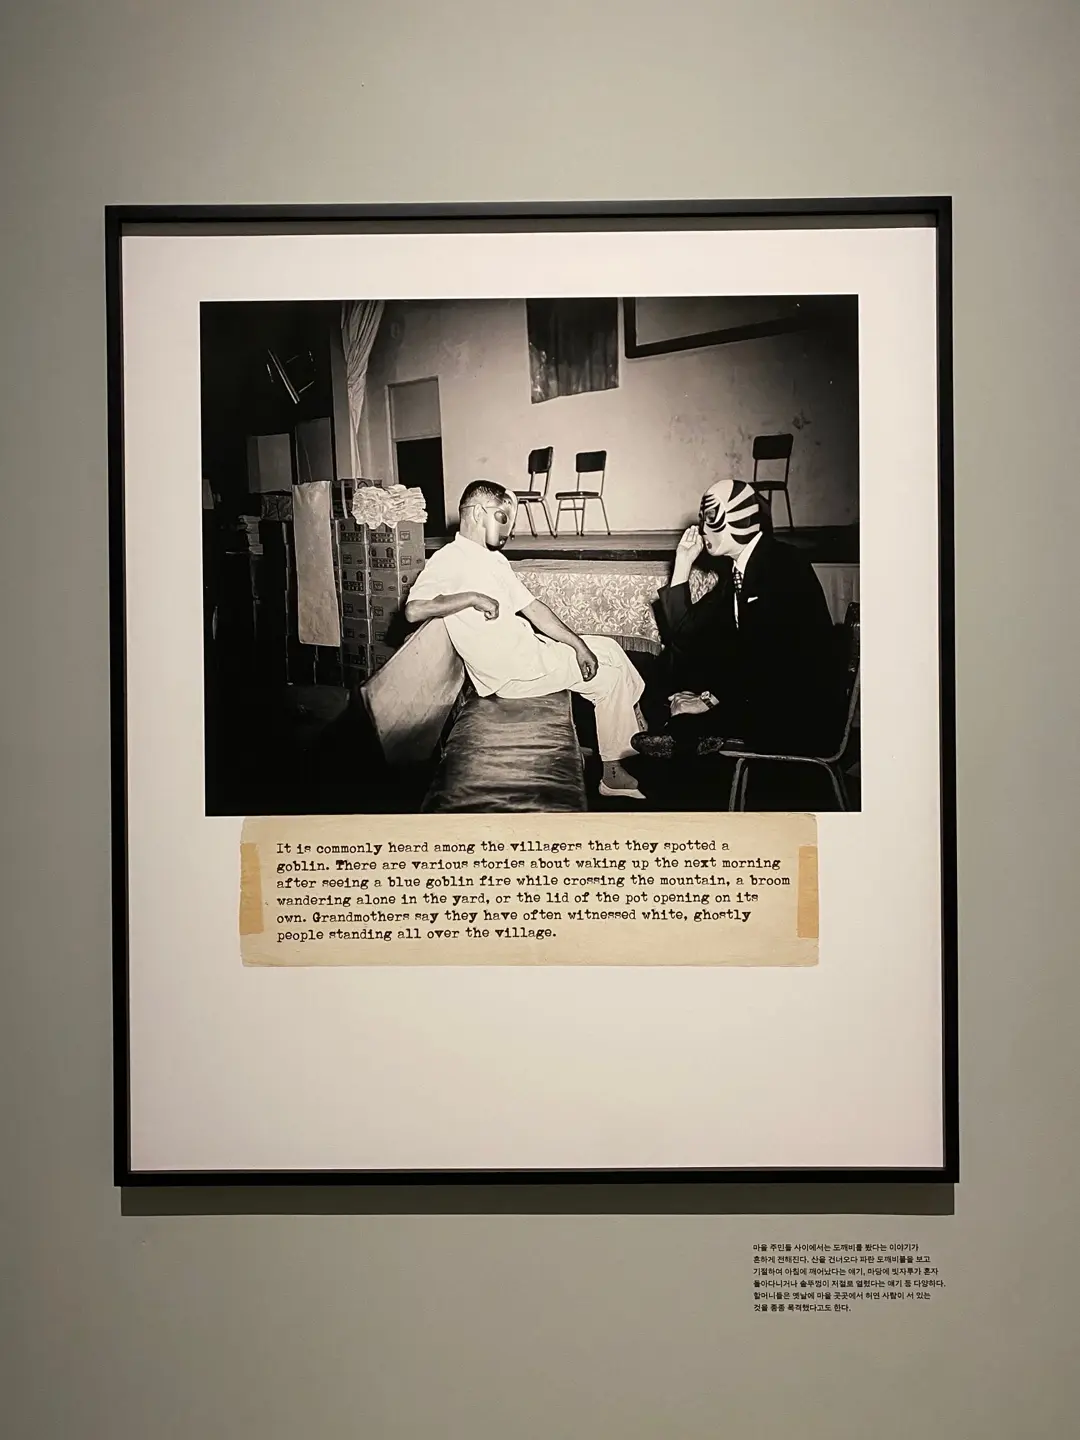 A framed vintage photograph featuring two masked individuals hangs on a gallery wall, accompanied by a textual caption.